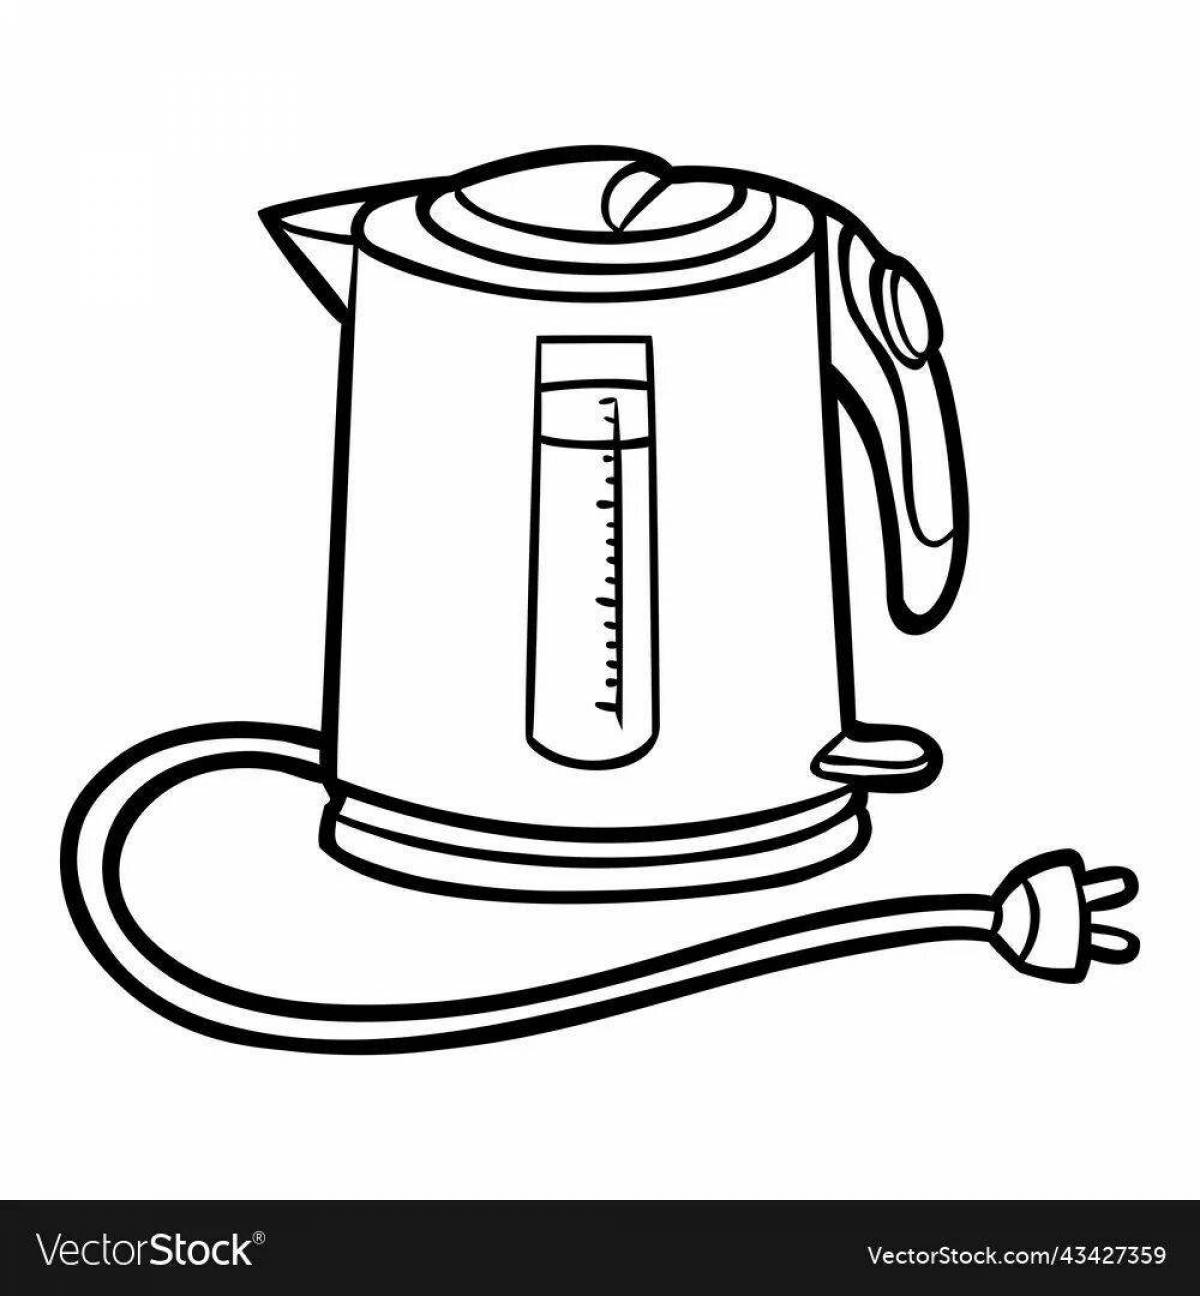 Electric kettle #14